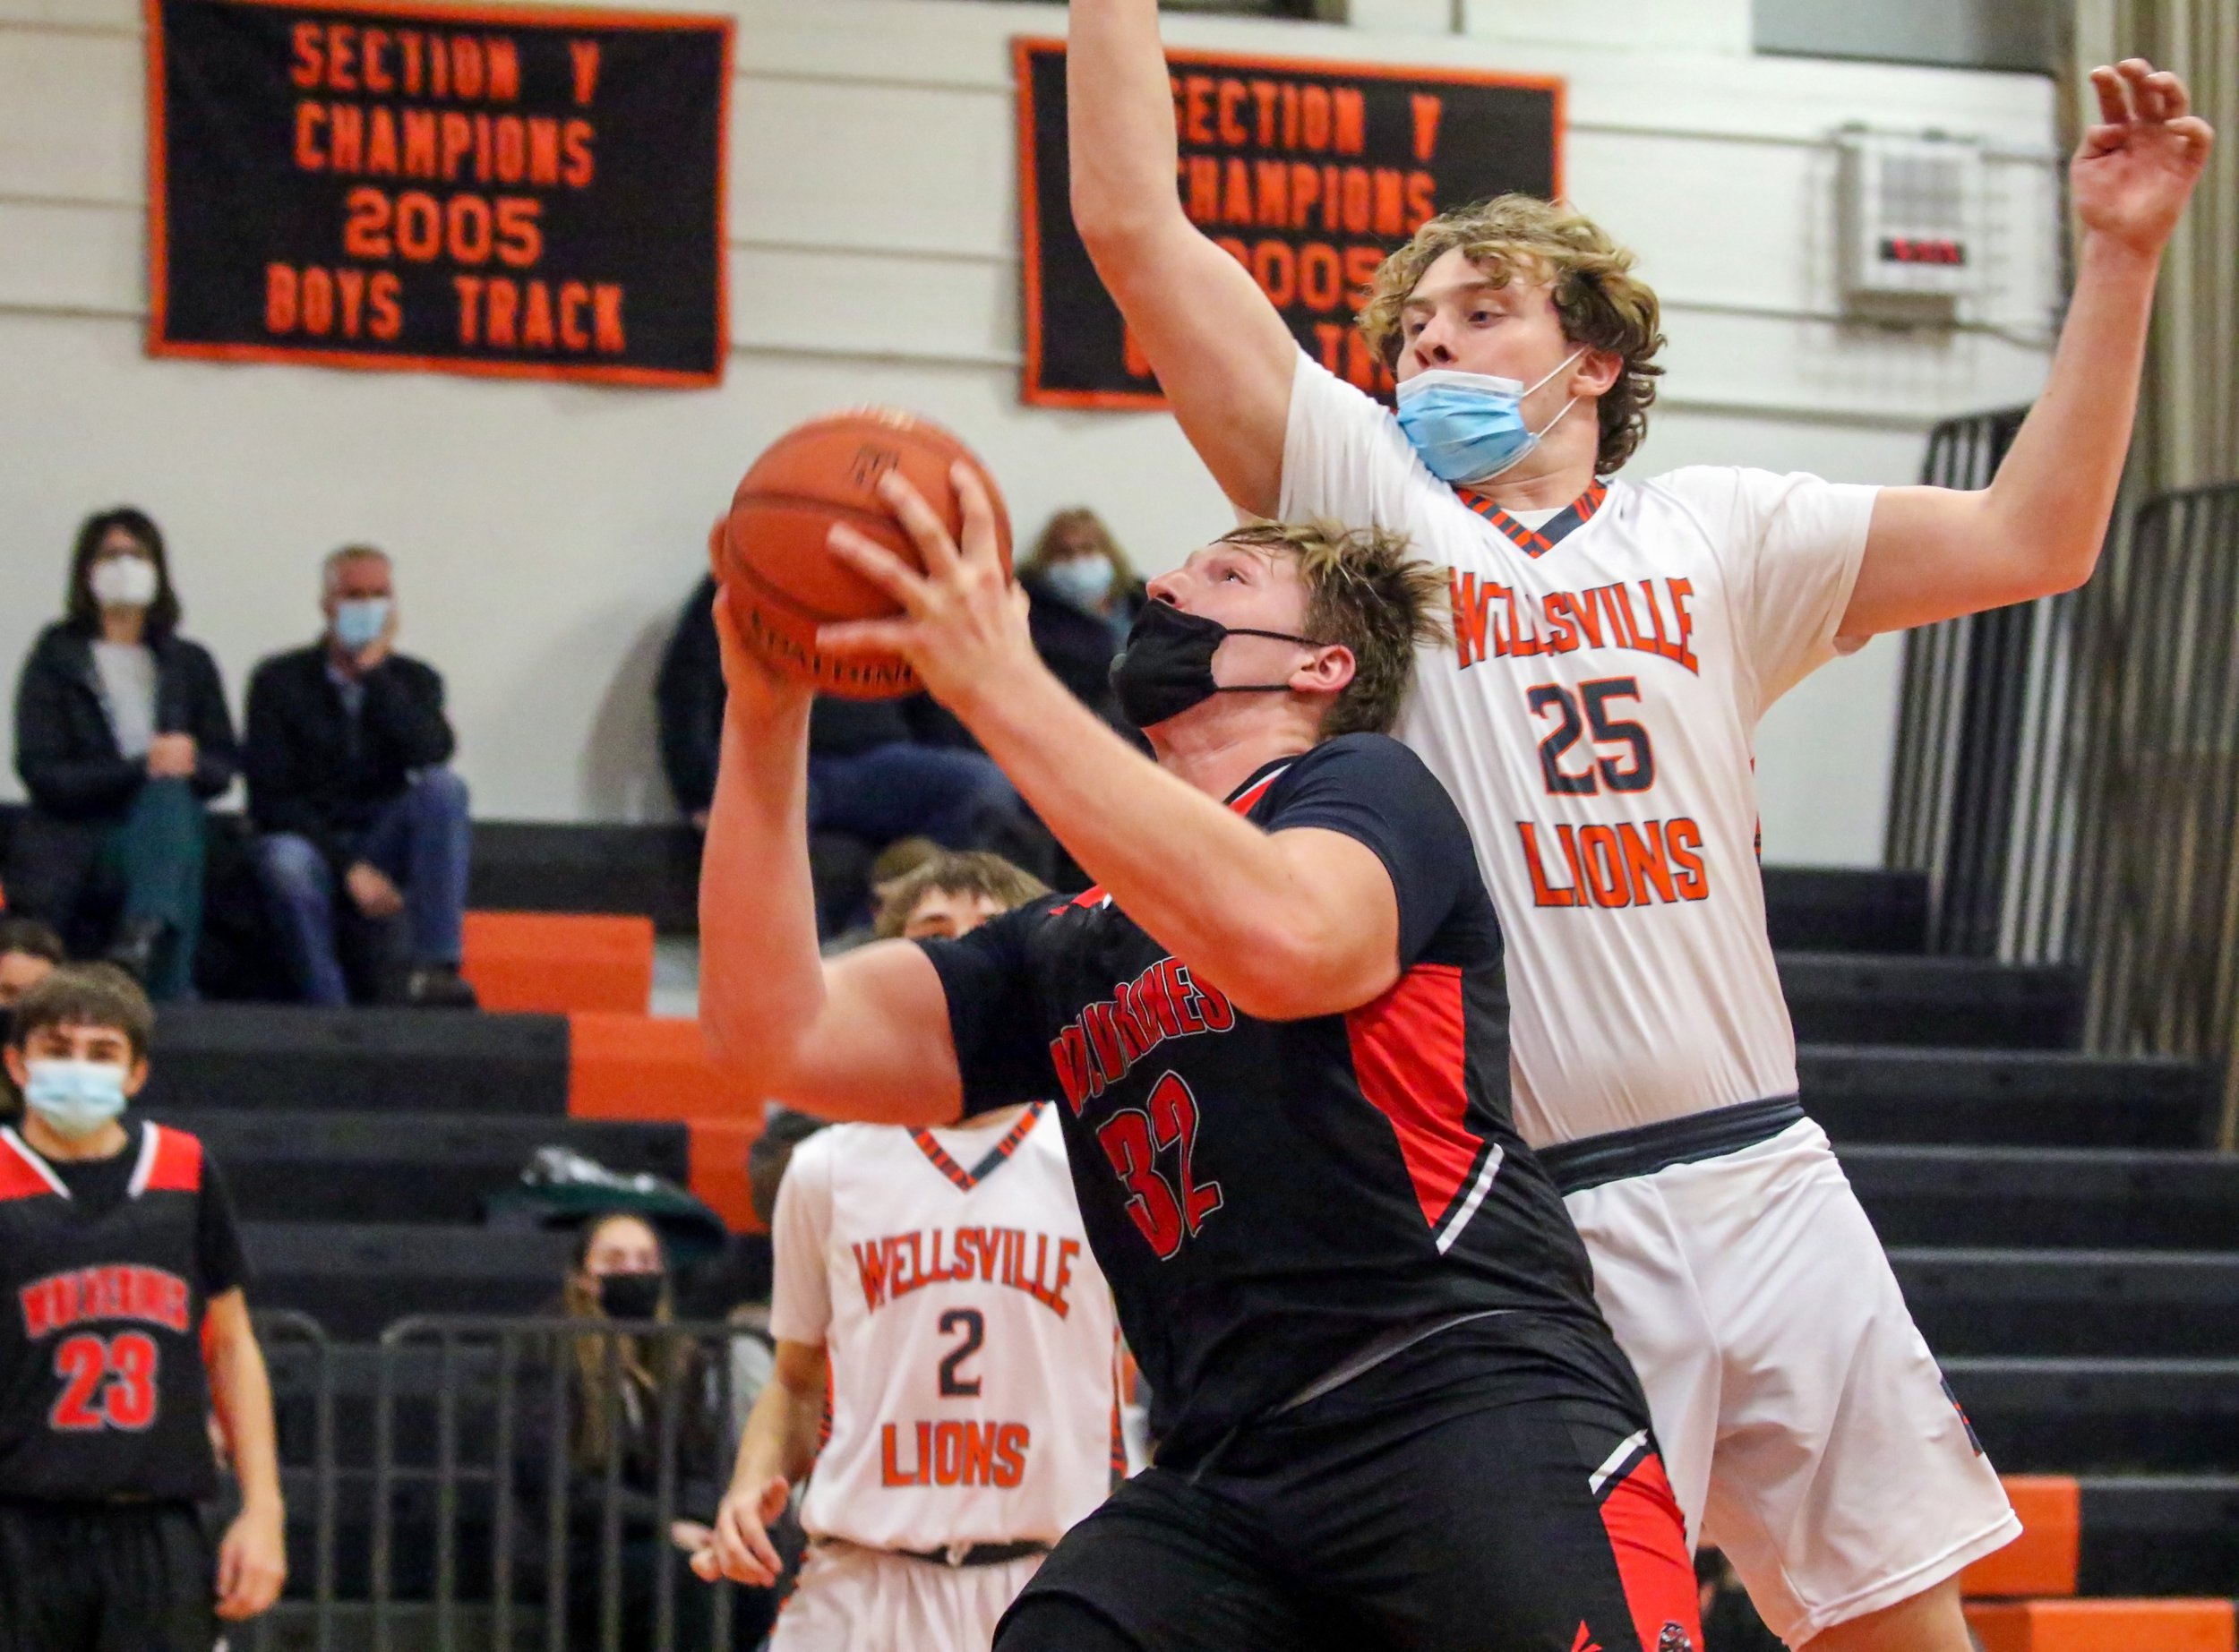  Bolivar-Richburg senior Cam MacDonell (32) goes up for the basket, as Wellsville senior Connor Ferguson (25) looks to block the shot during Tuesday night’s road contest in Wellsville. [Chris Brooks/WellsvilleSports.com] 